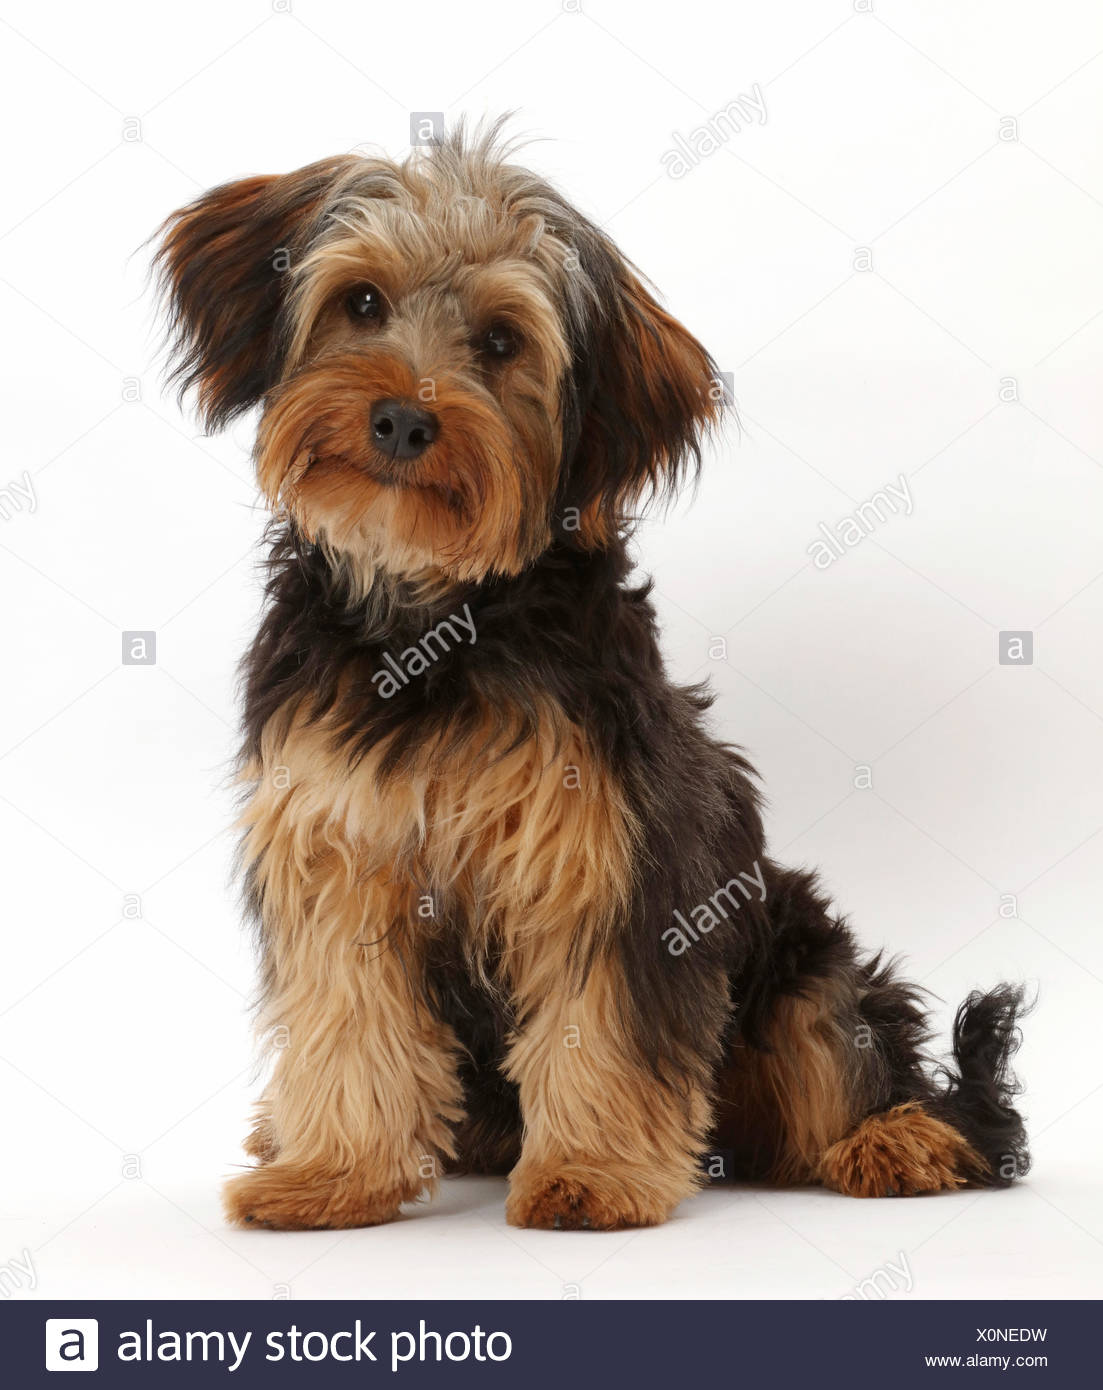 toy poodle x yorkshire terrier